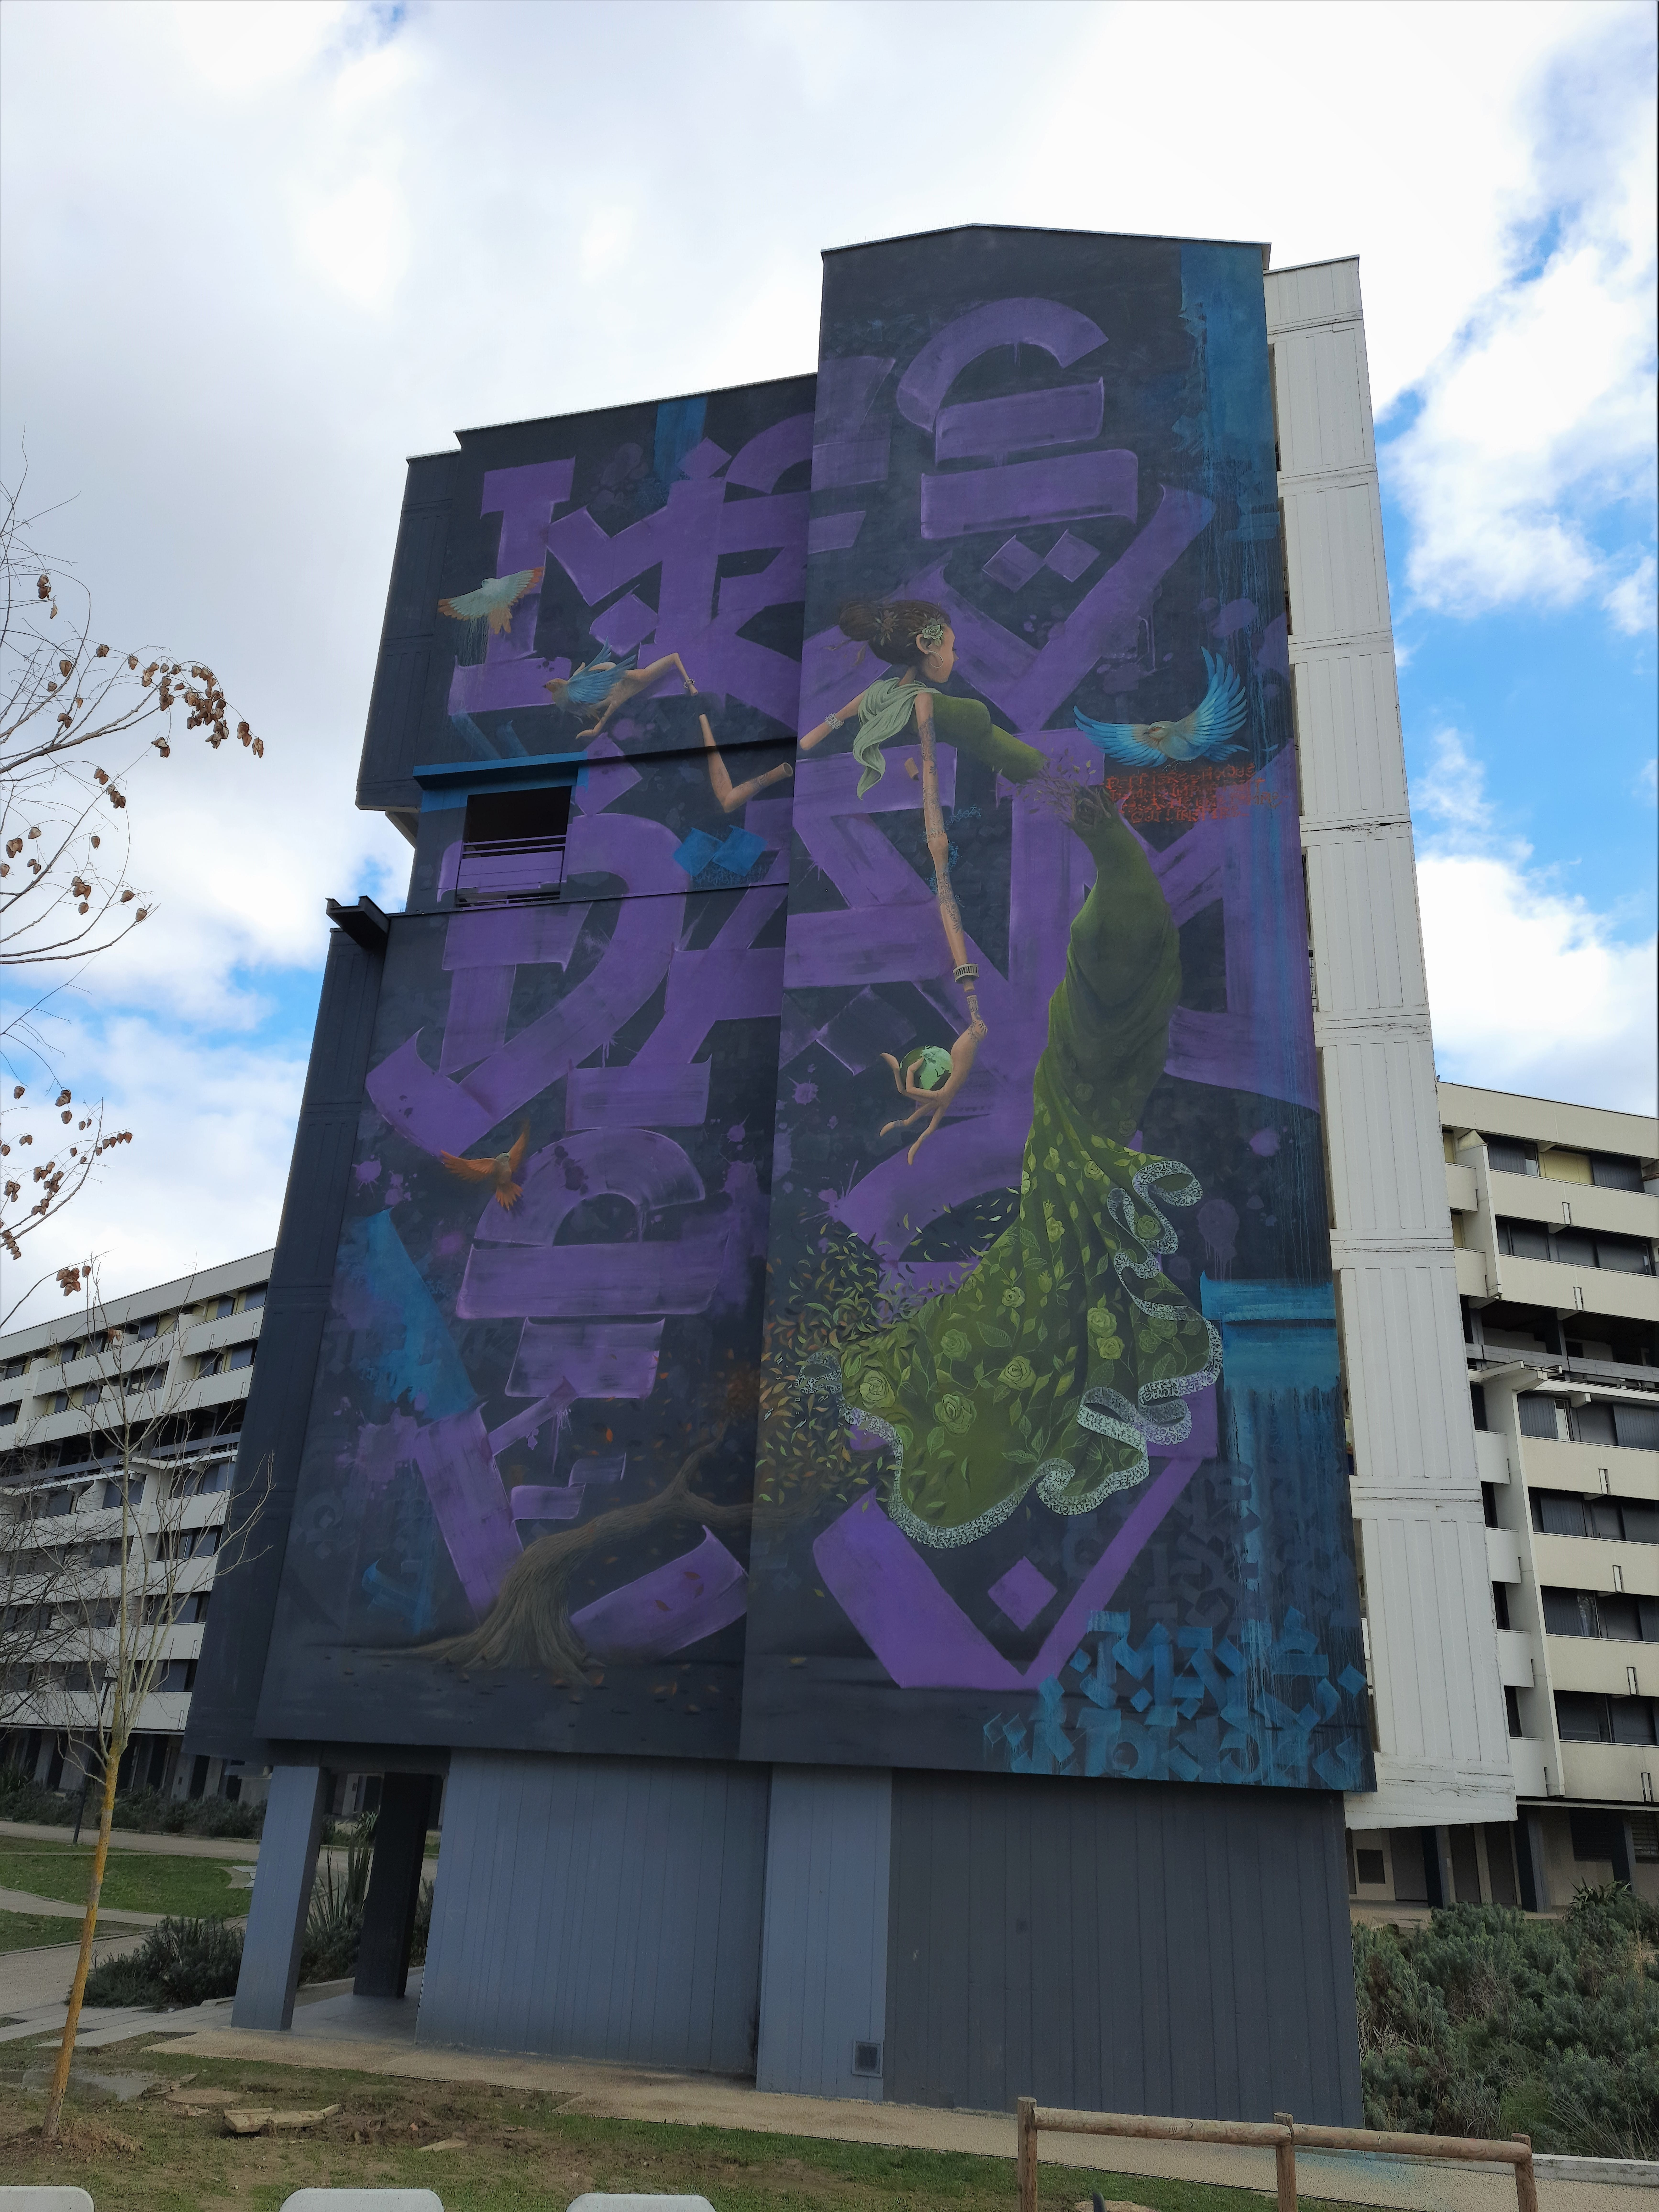 Graffiti 6265  by the artist Mayé captured by Mephisroth in Toulouse France